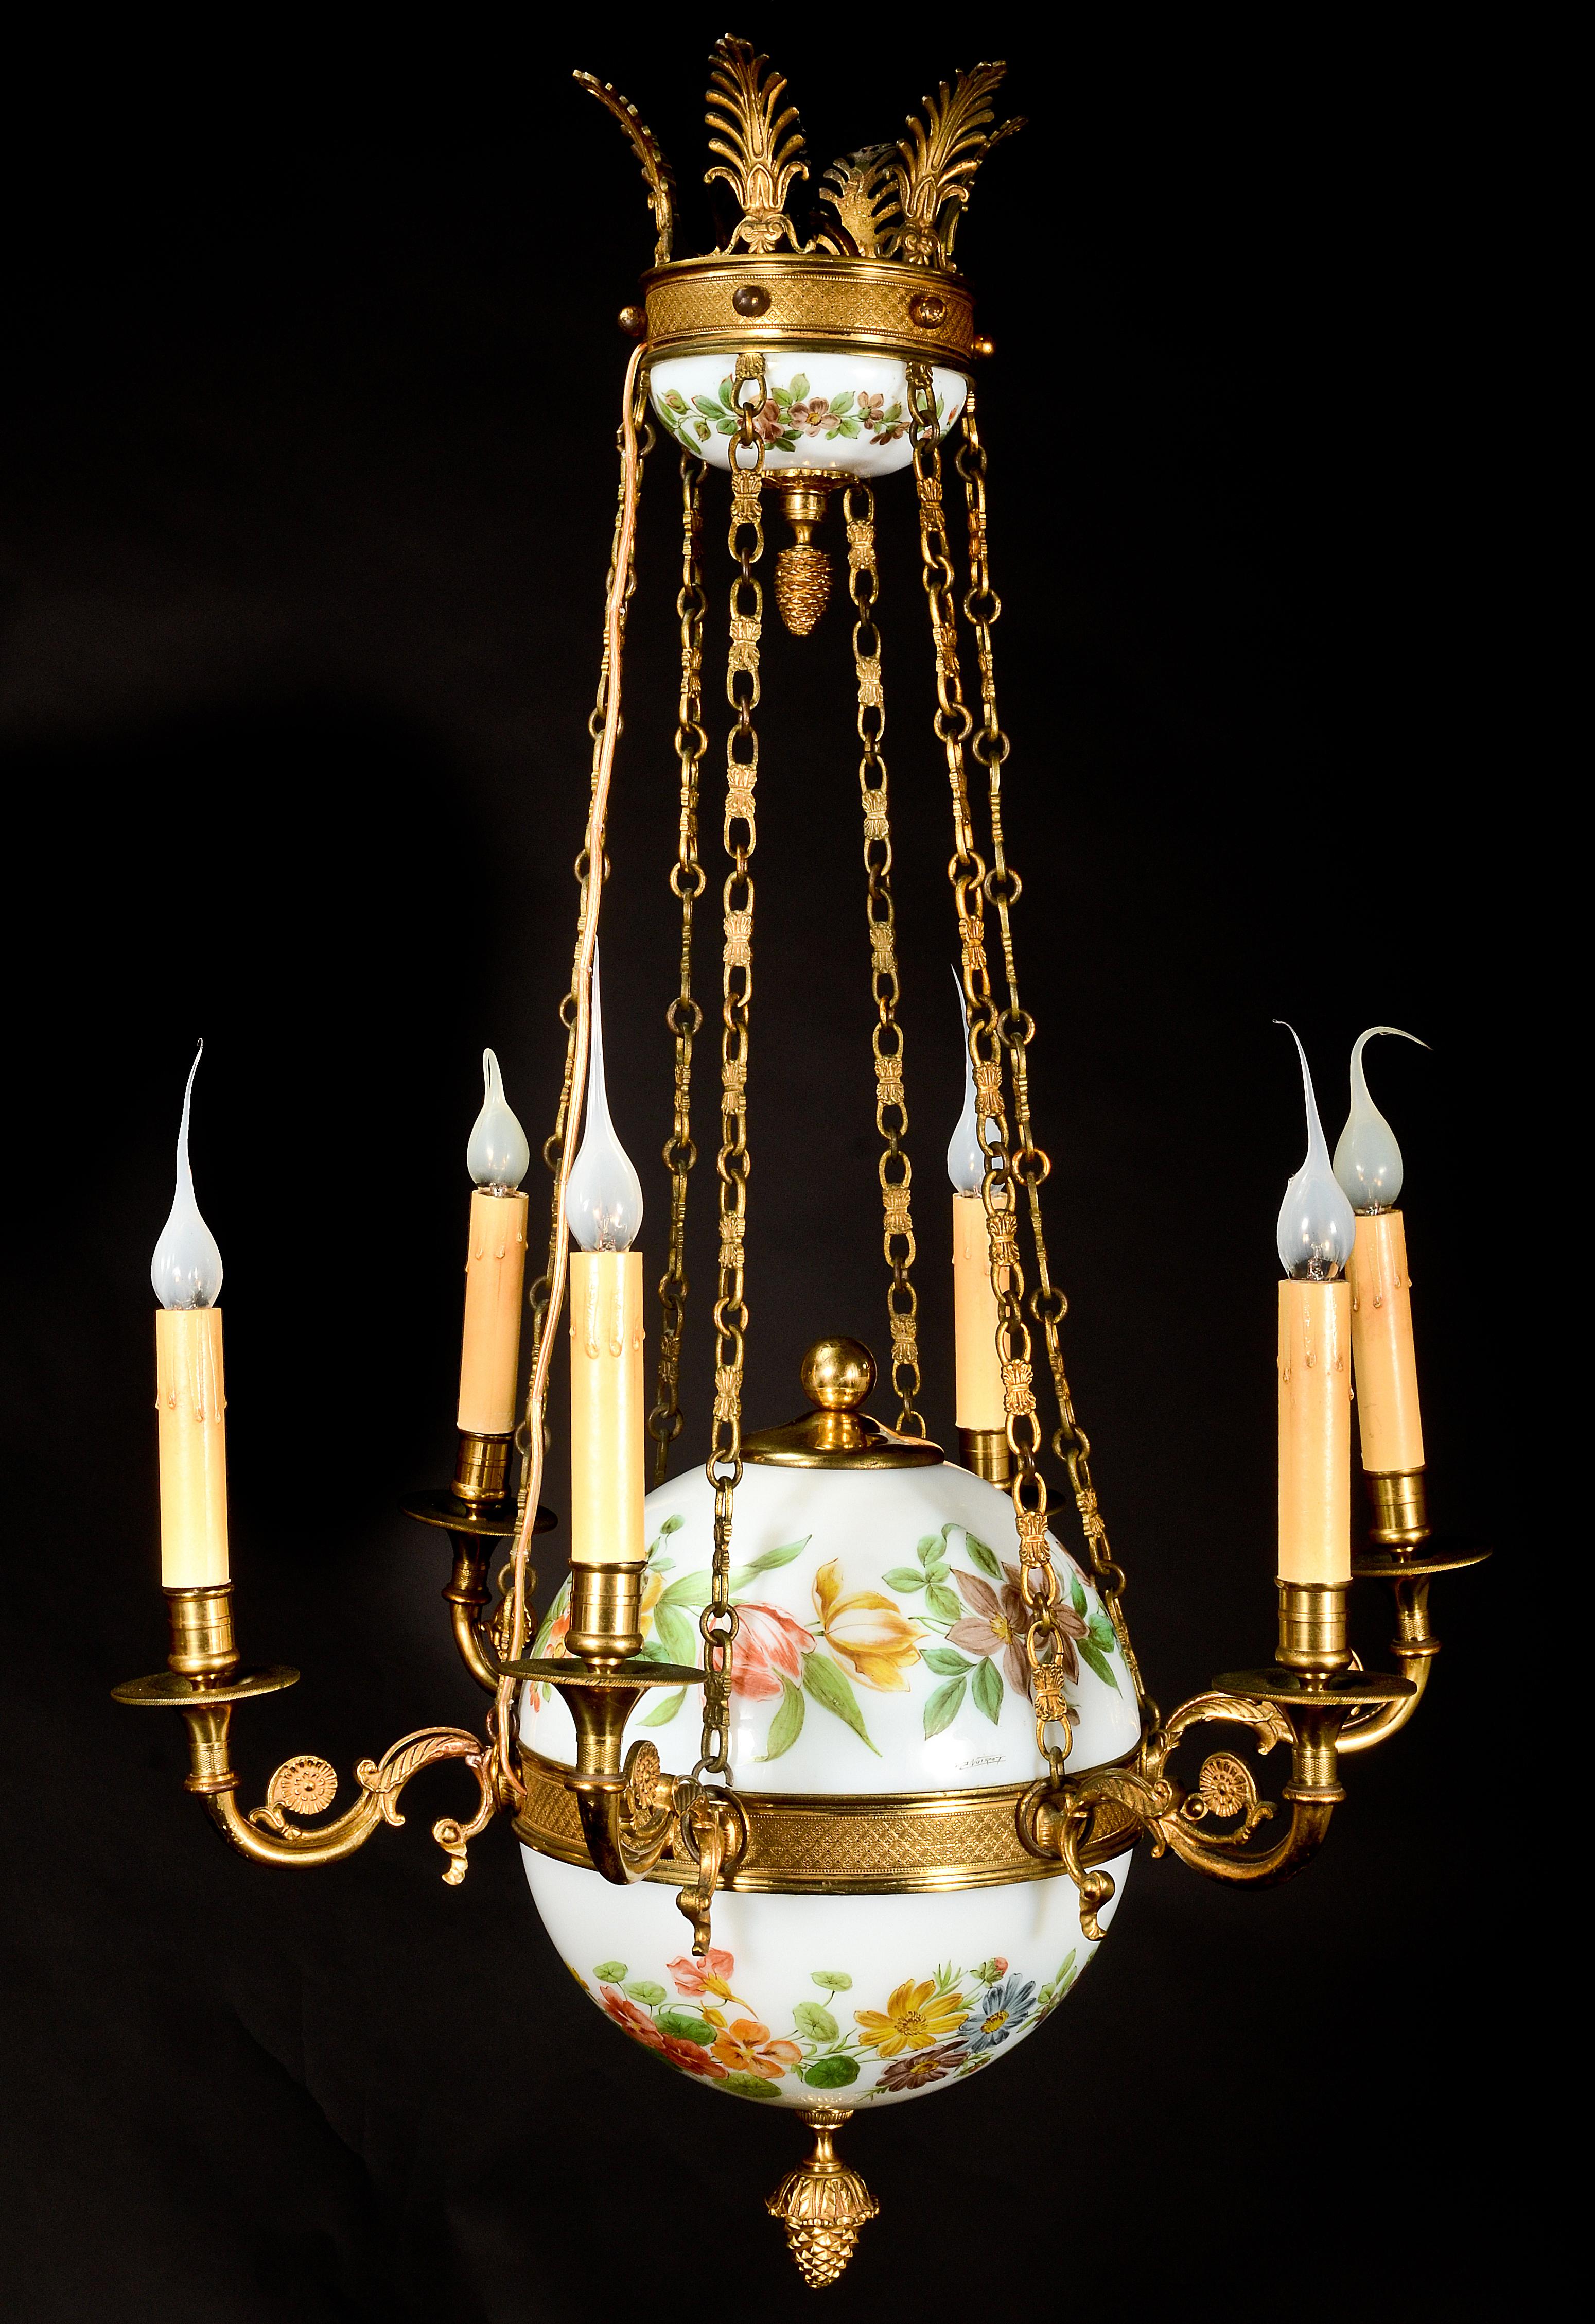 A fine antique French Charles X style gilt bronze and white opaline glass ball form multi light chandelier of superb quality embellished with hand painted polychromed enamel depicting flowers and further embellished with gilt bronze chains and